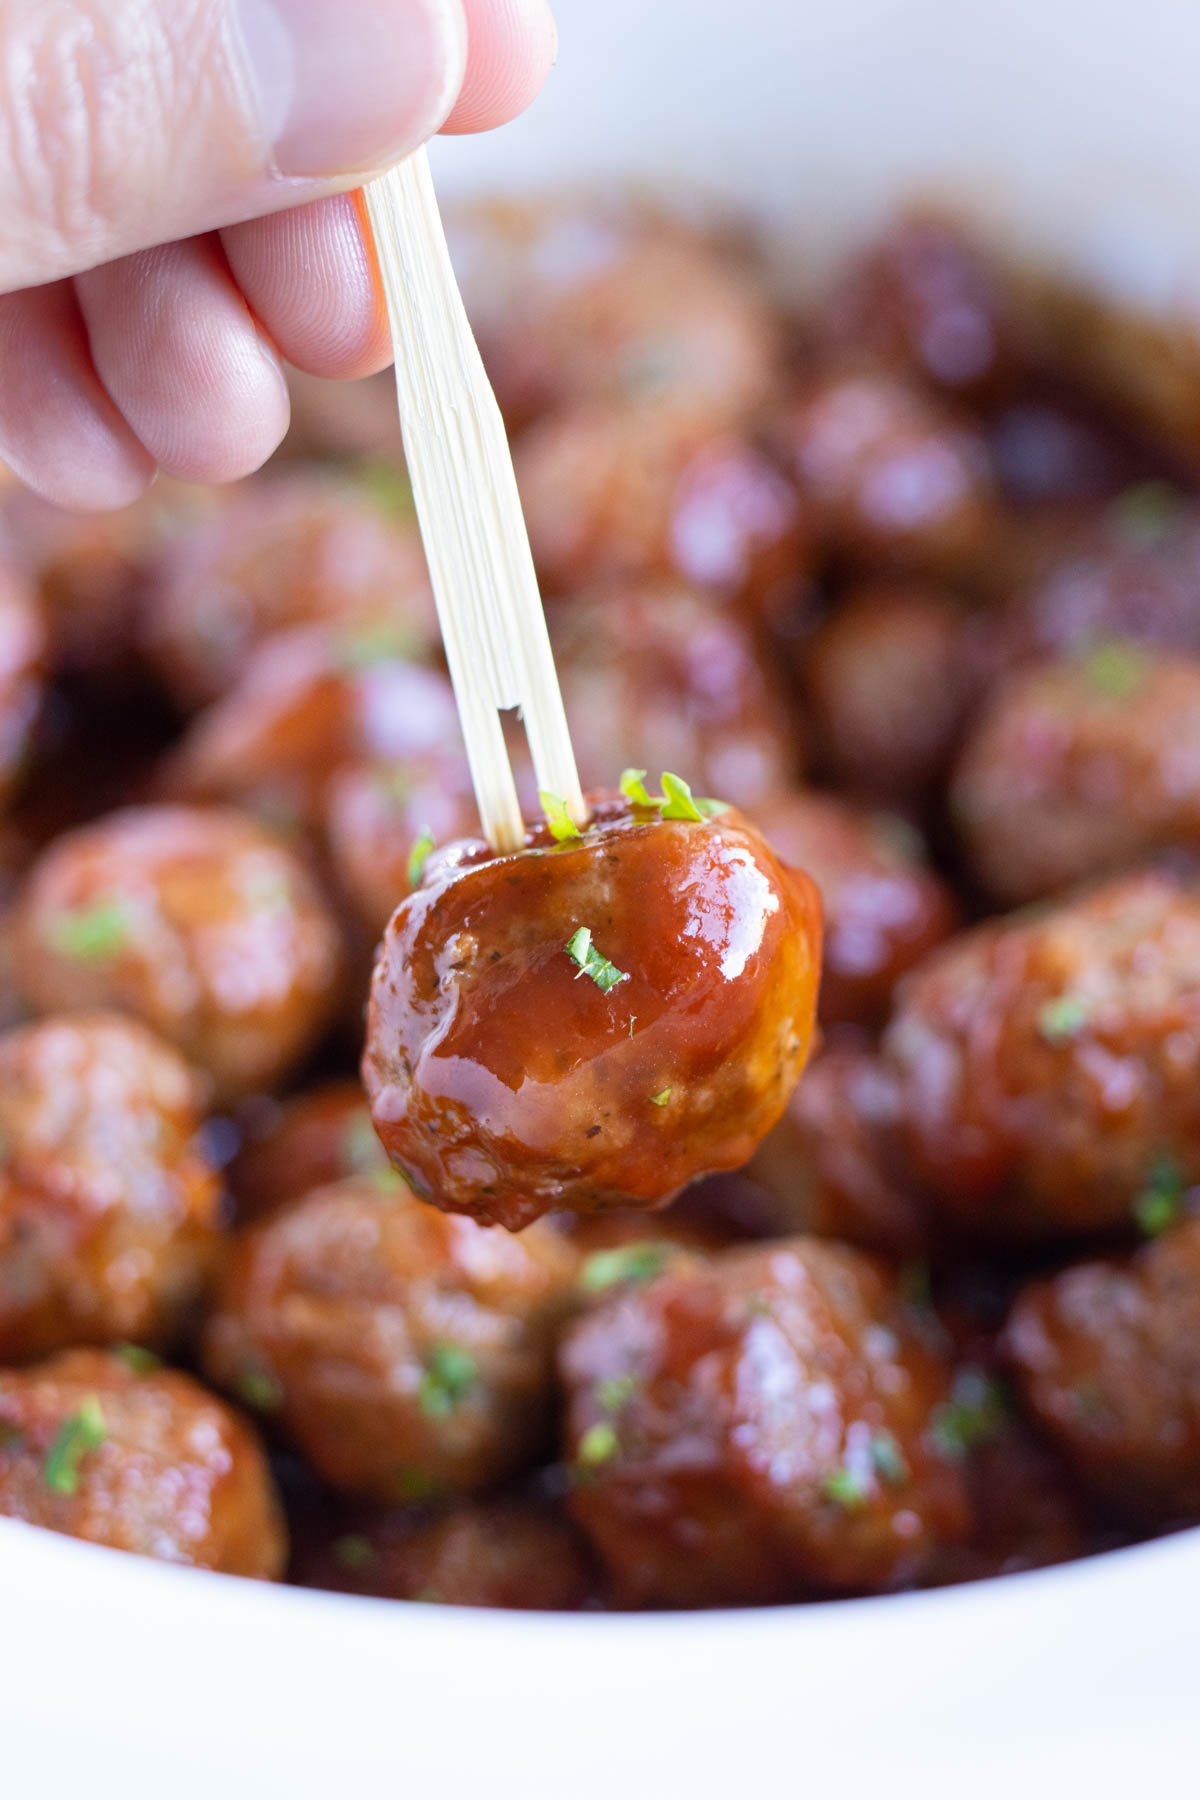 A toothpick is shown holding a meatball.